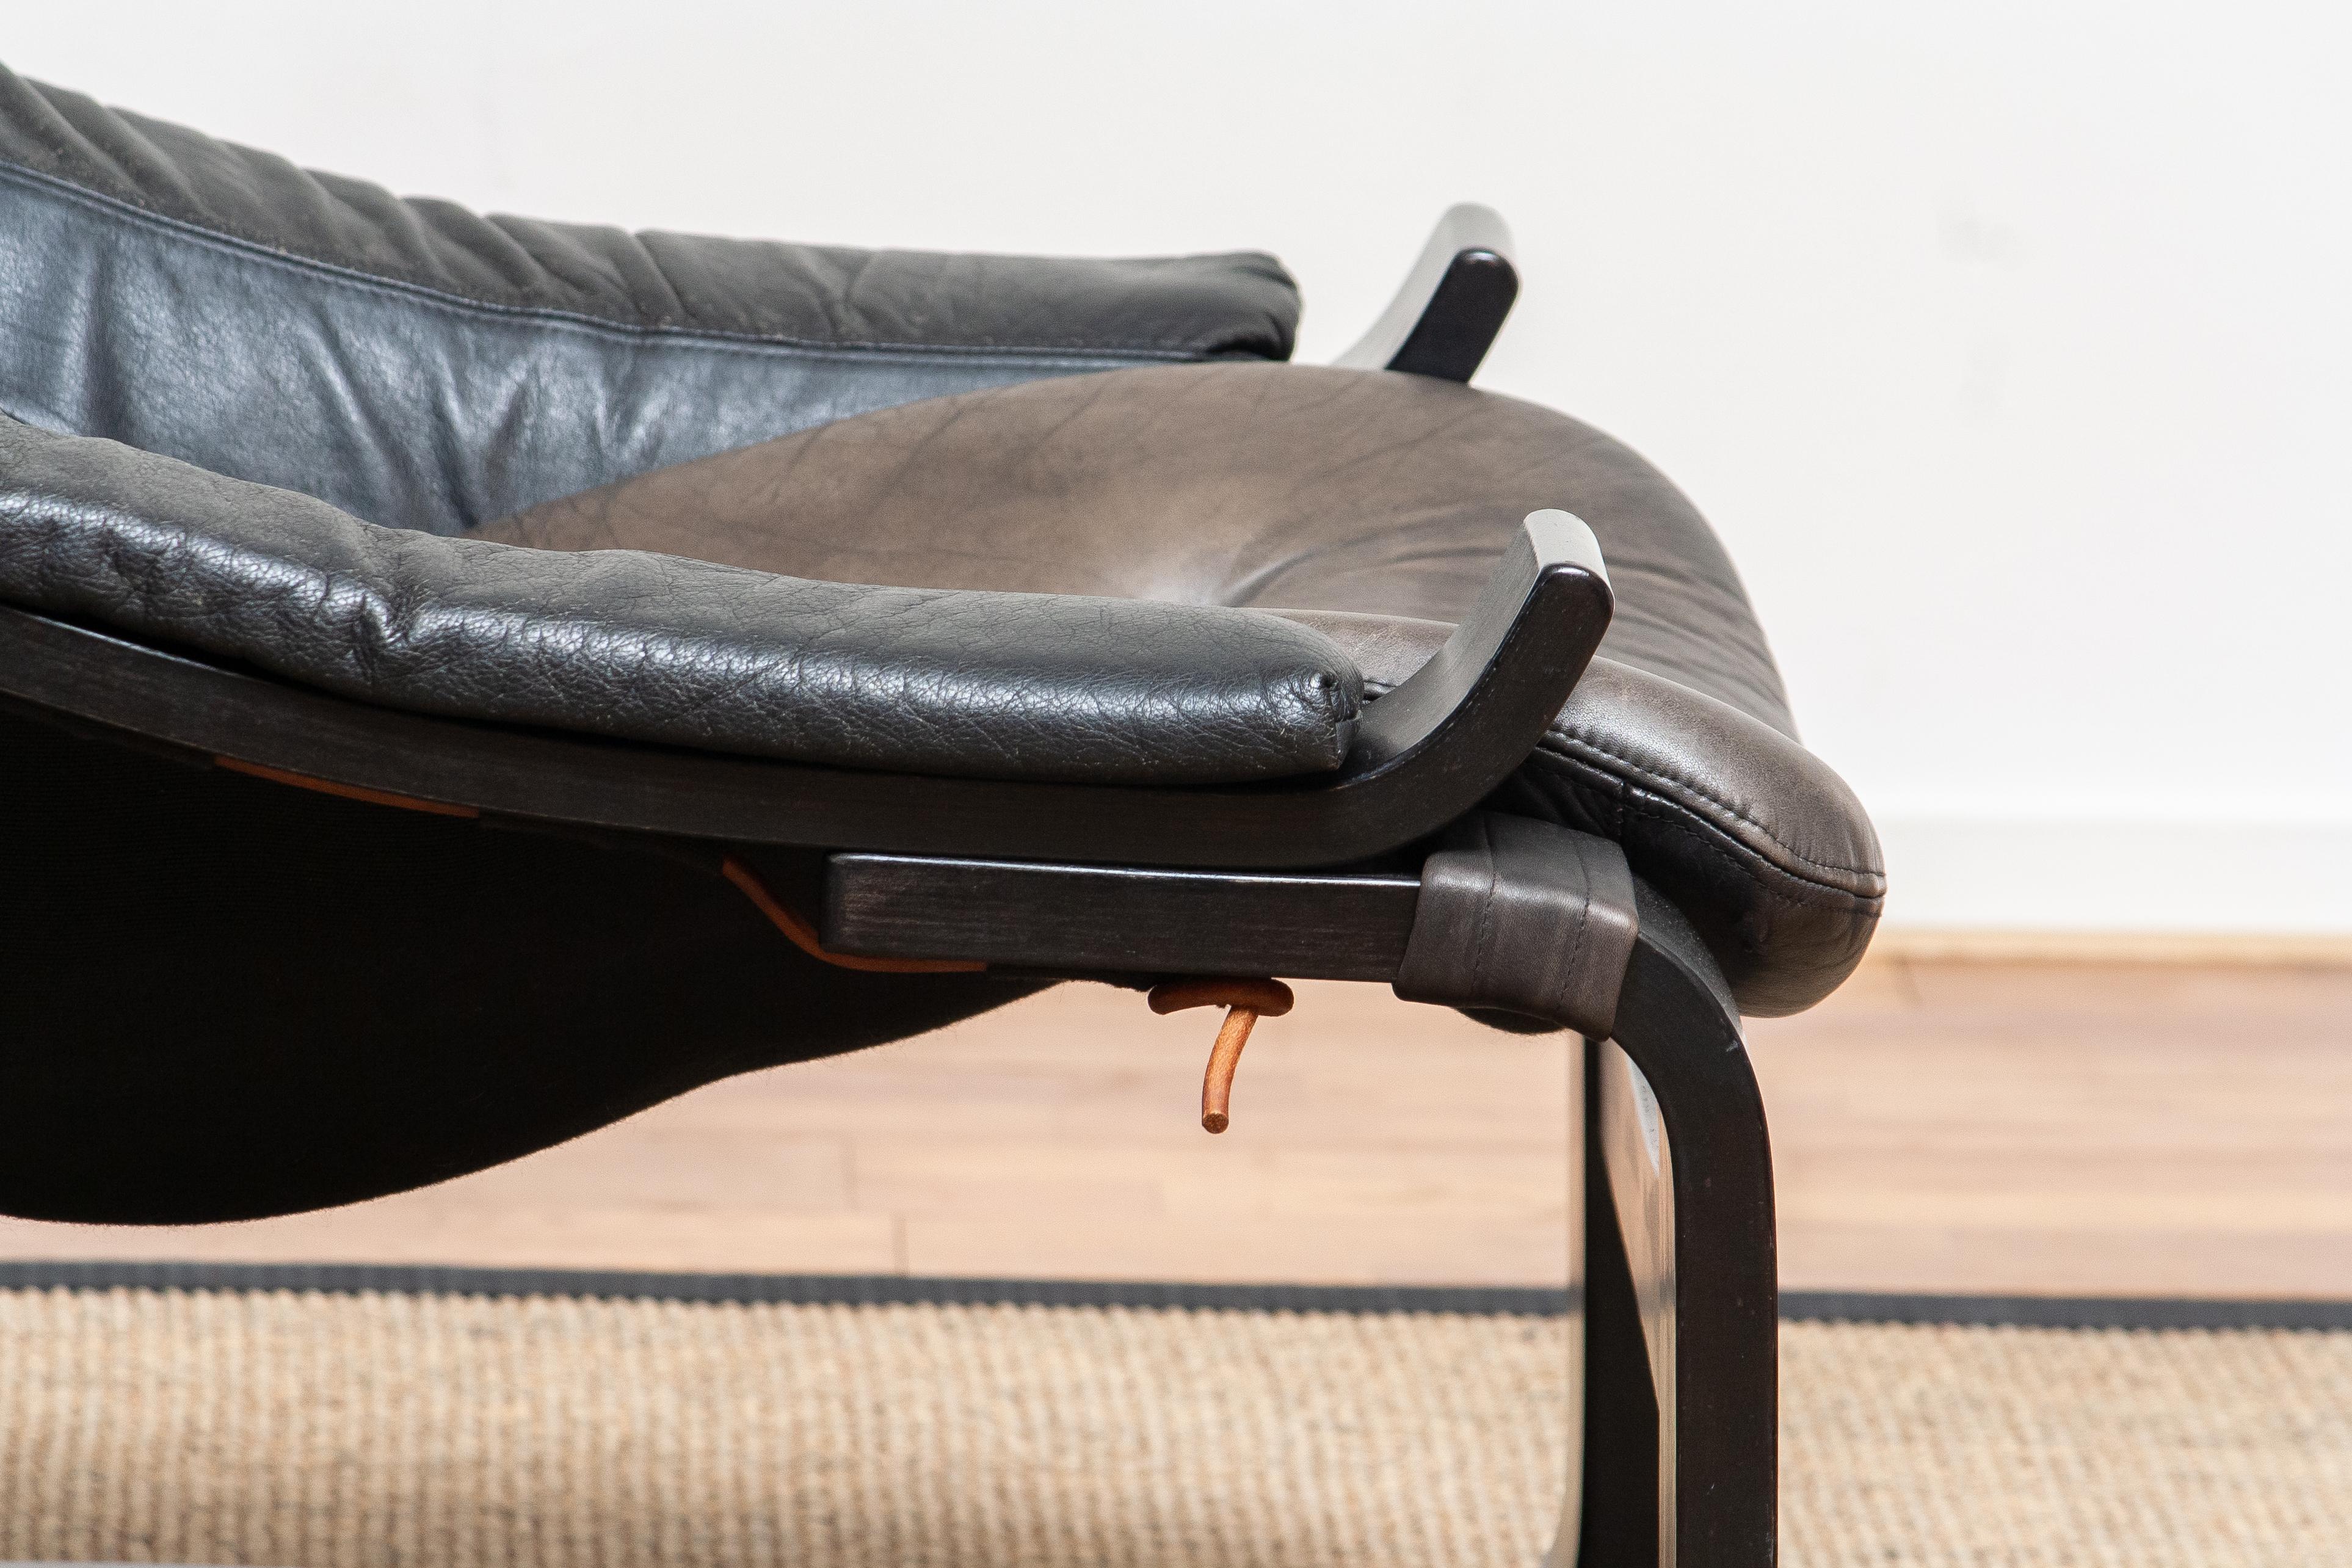 1970s, Black Leather Club Lounge Chair by Ake Fribytter for Nelo, Sweden In Good Condition In Silvolde, Gelderland